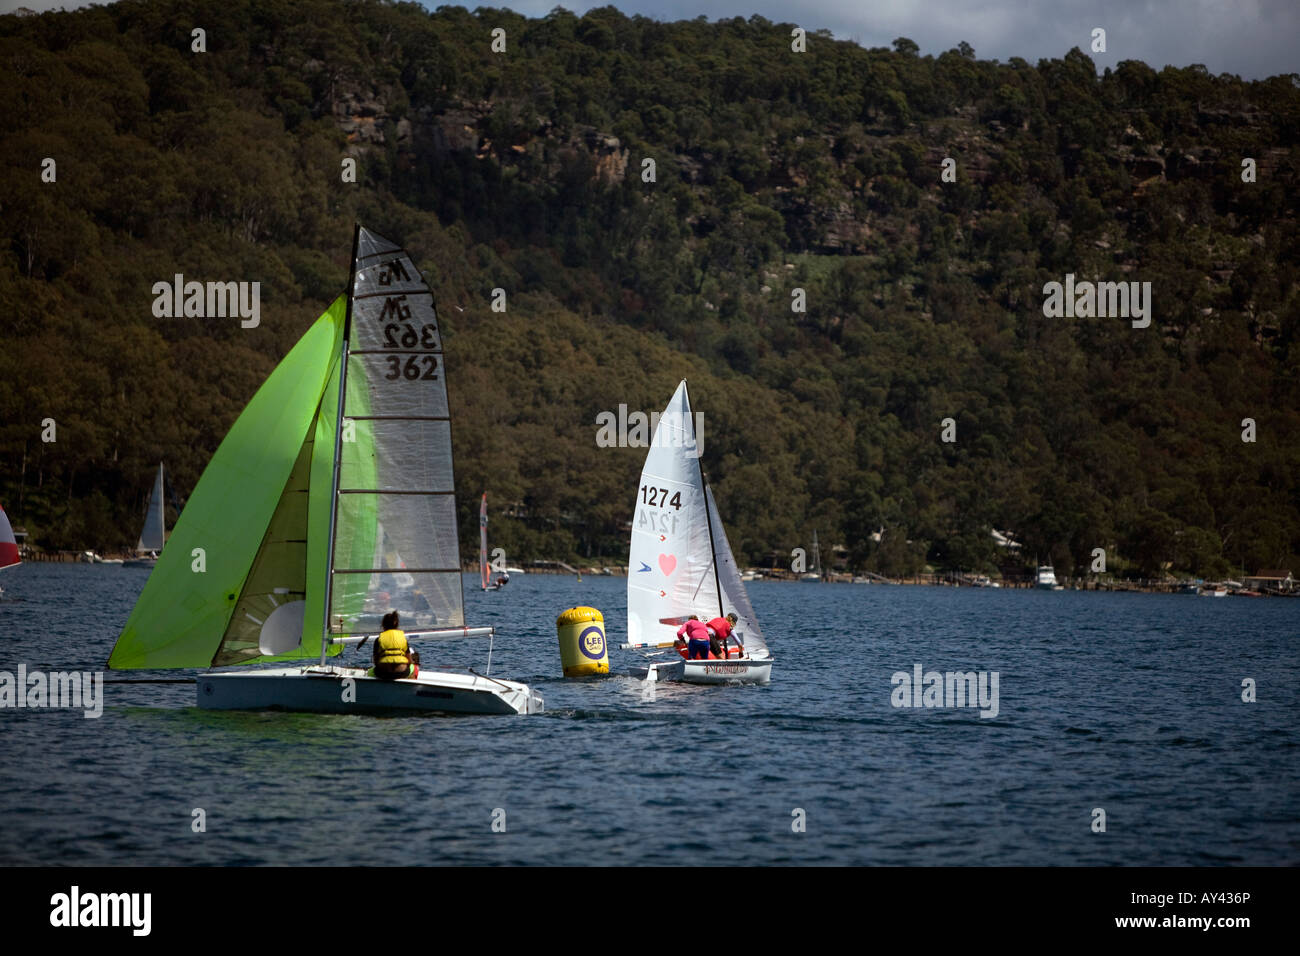 dinghy sailing on pittwater sydney new south wales australia Stock Photo